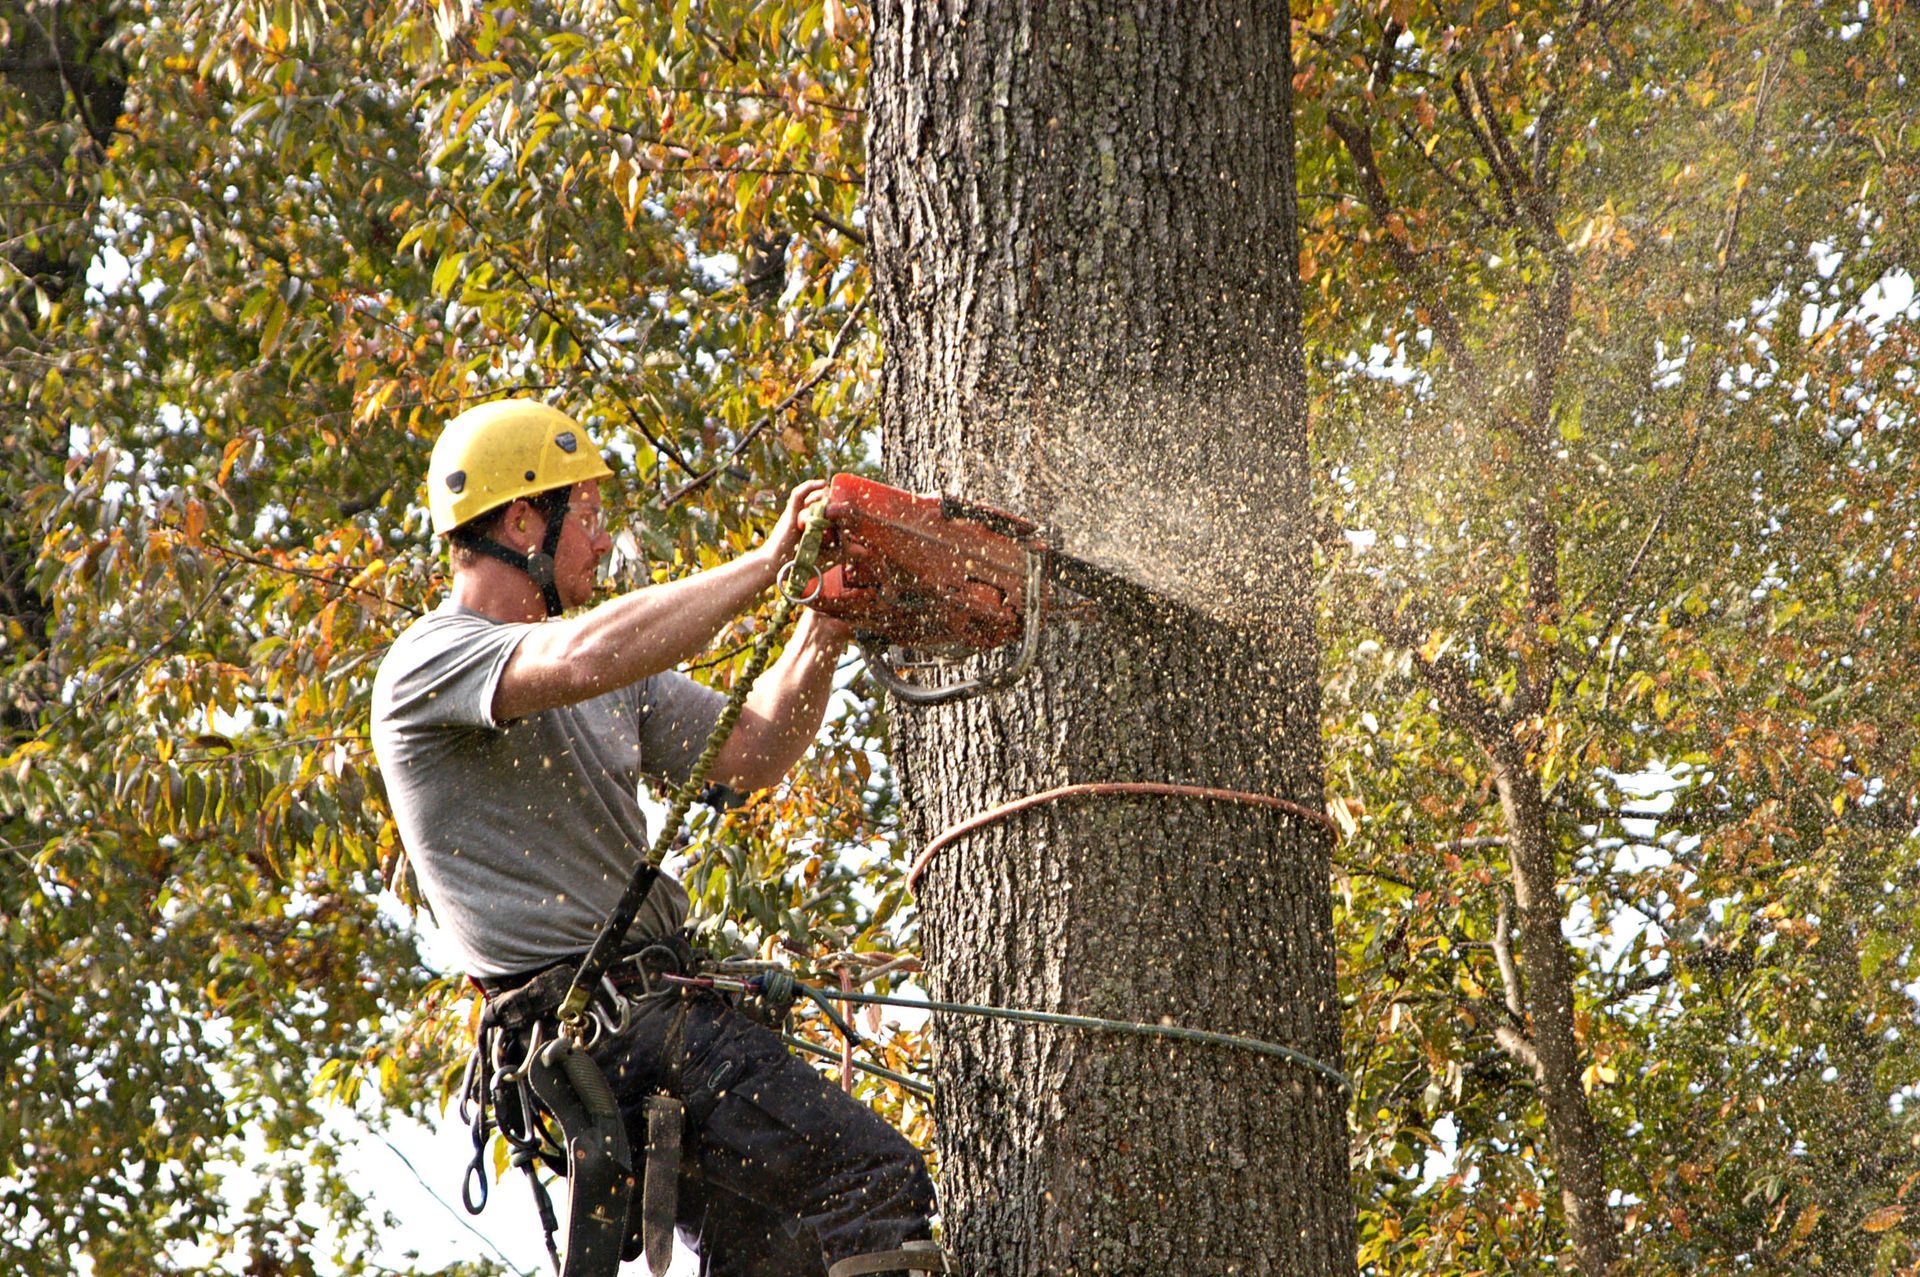 local tree service business